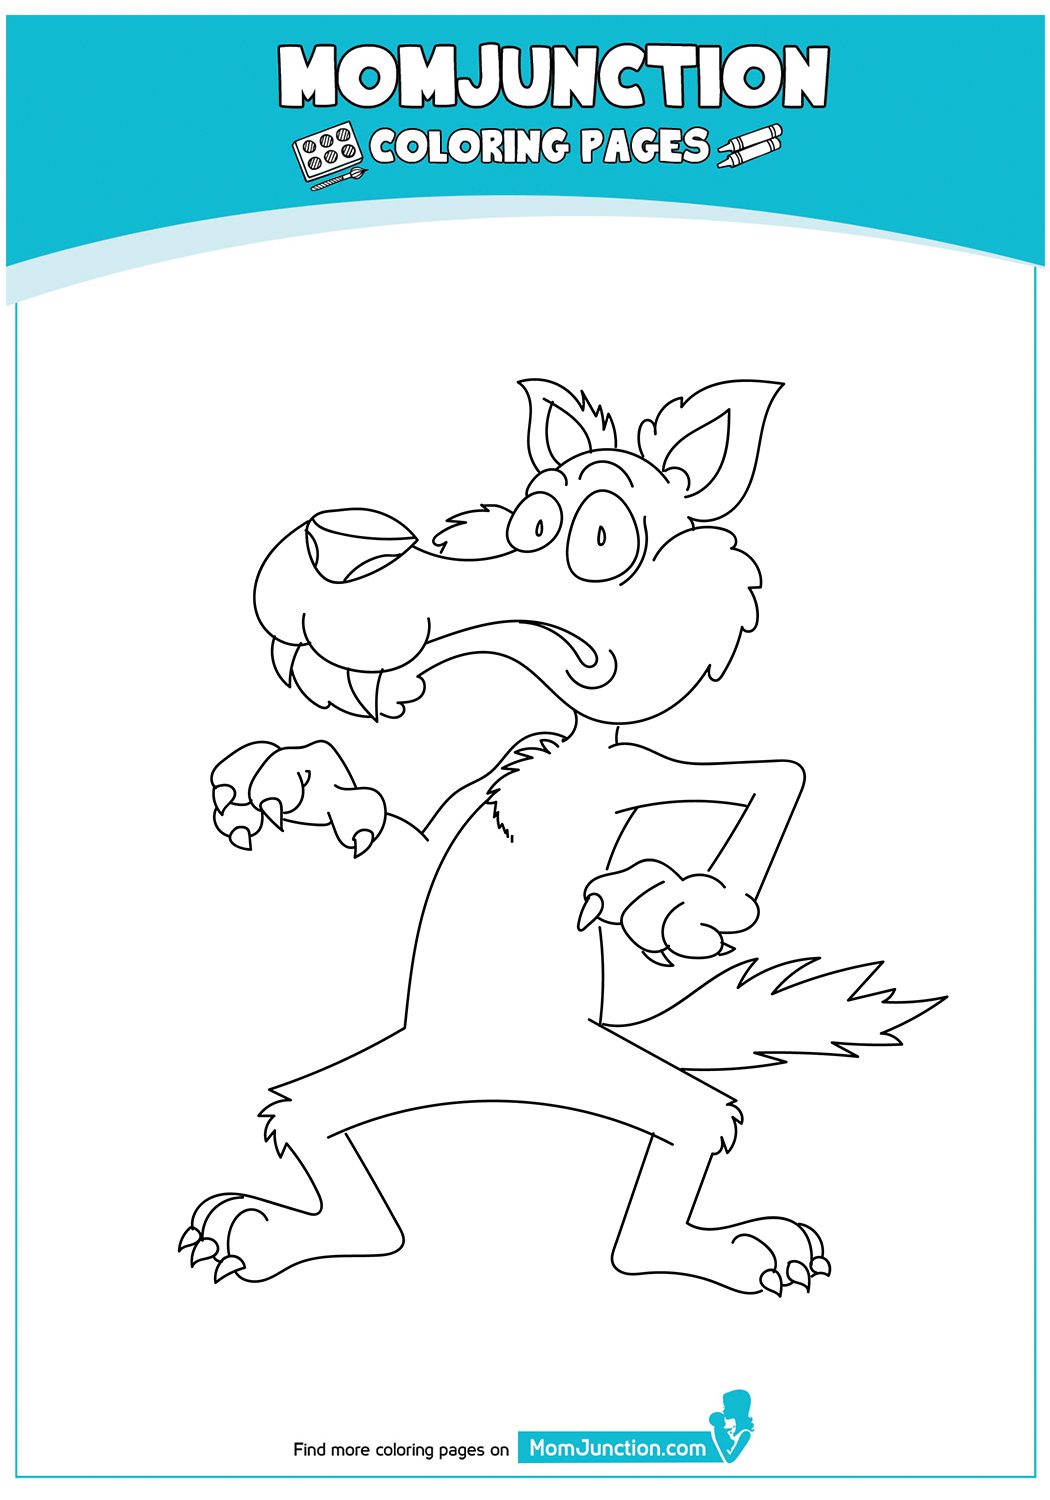 Coloring-Pages-of-Cartoon-Wolf-16